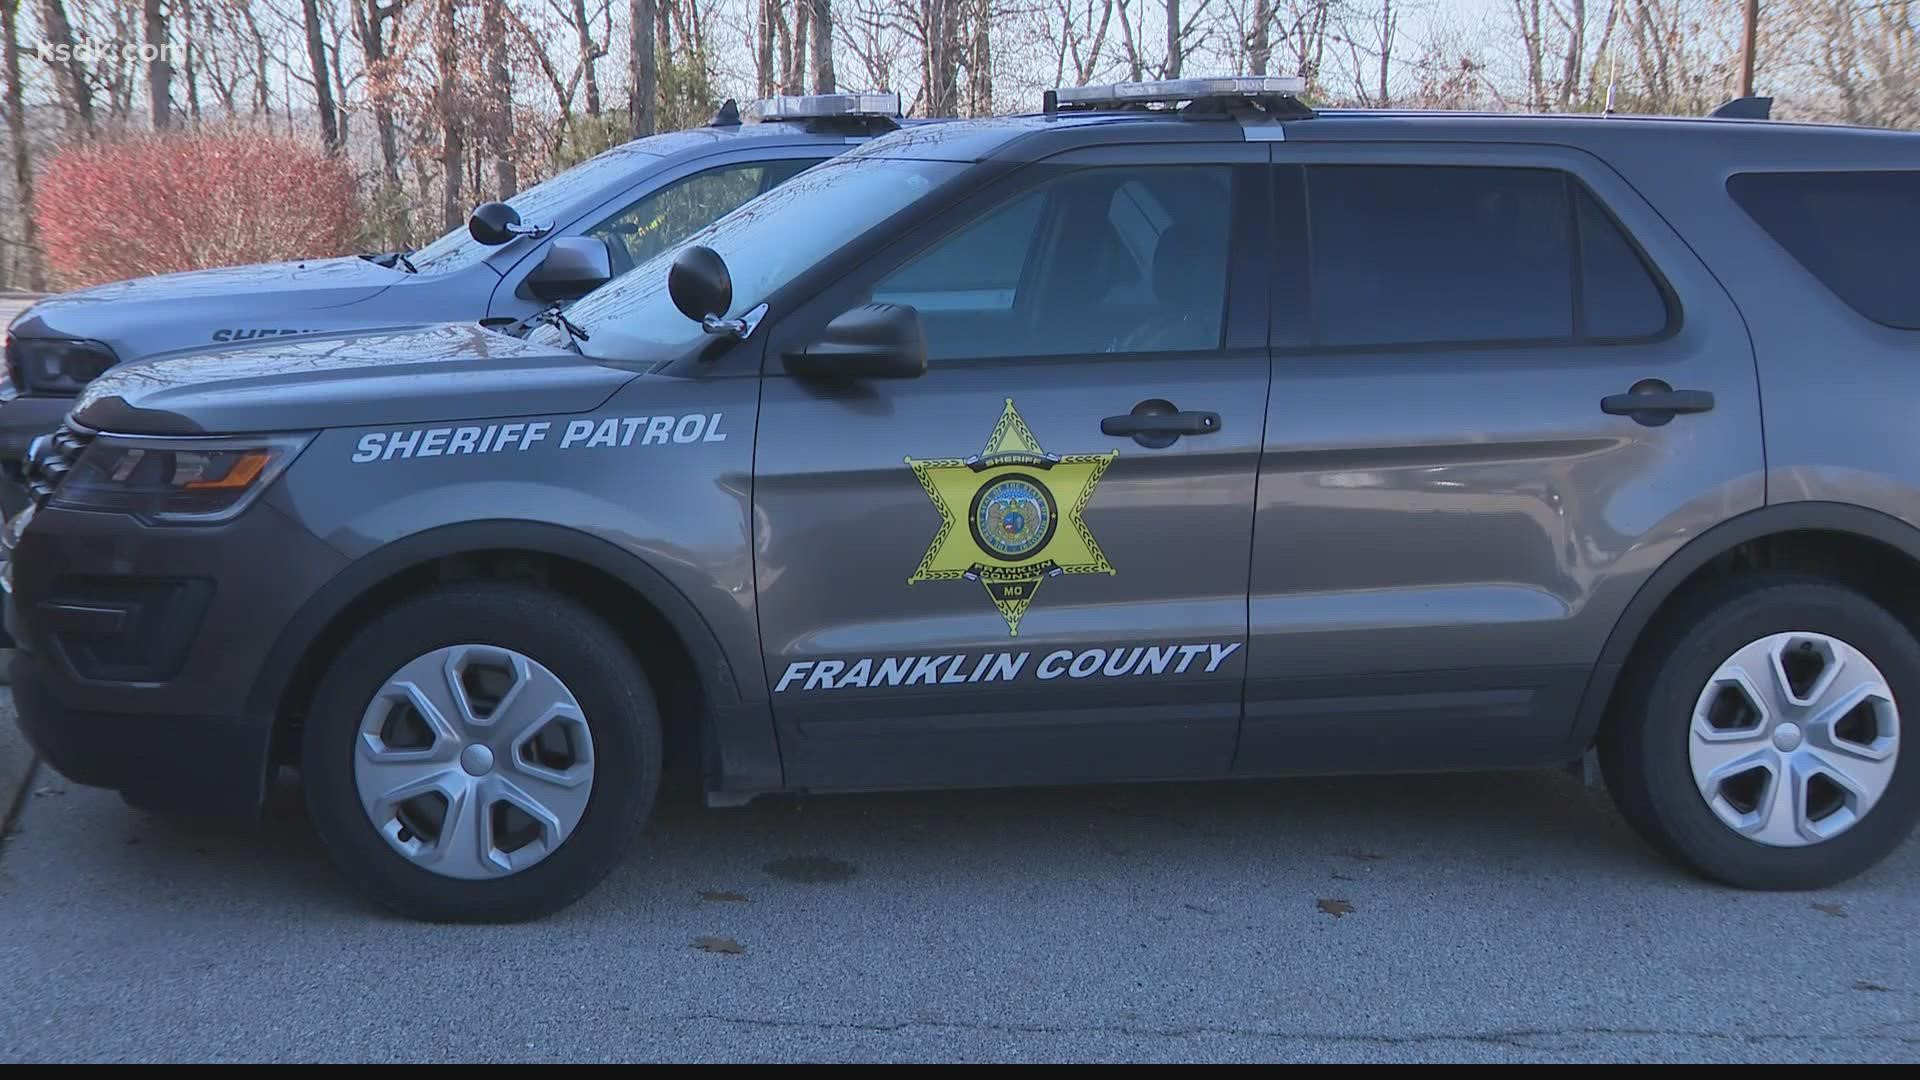 Investigators believe the suspects shot and killed 18-year-old Kiley Kennedy after an altercation over narcotics and money in Franklin County.